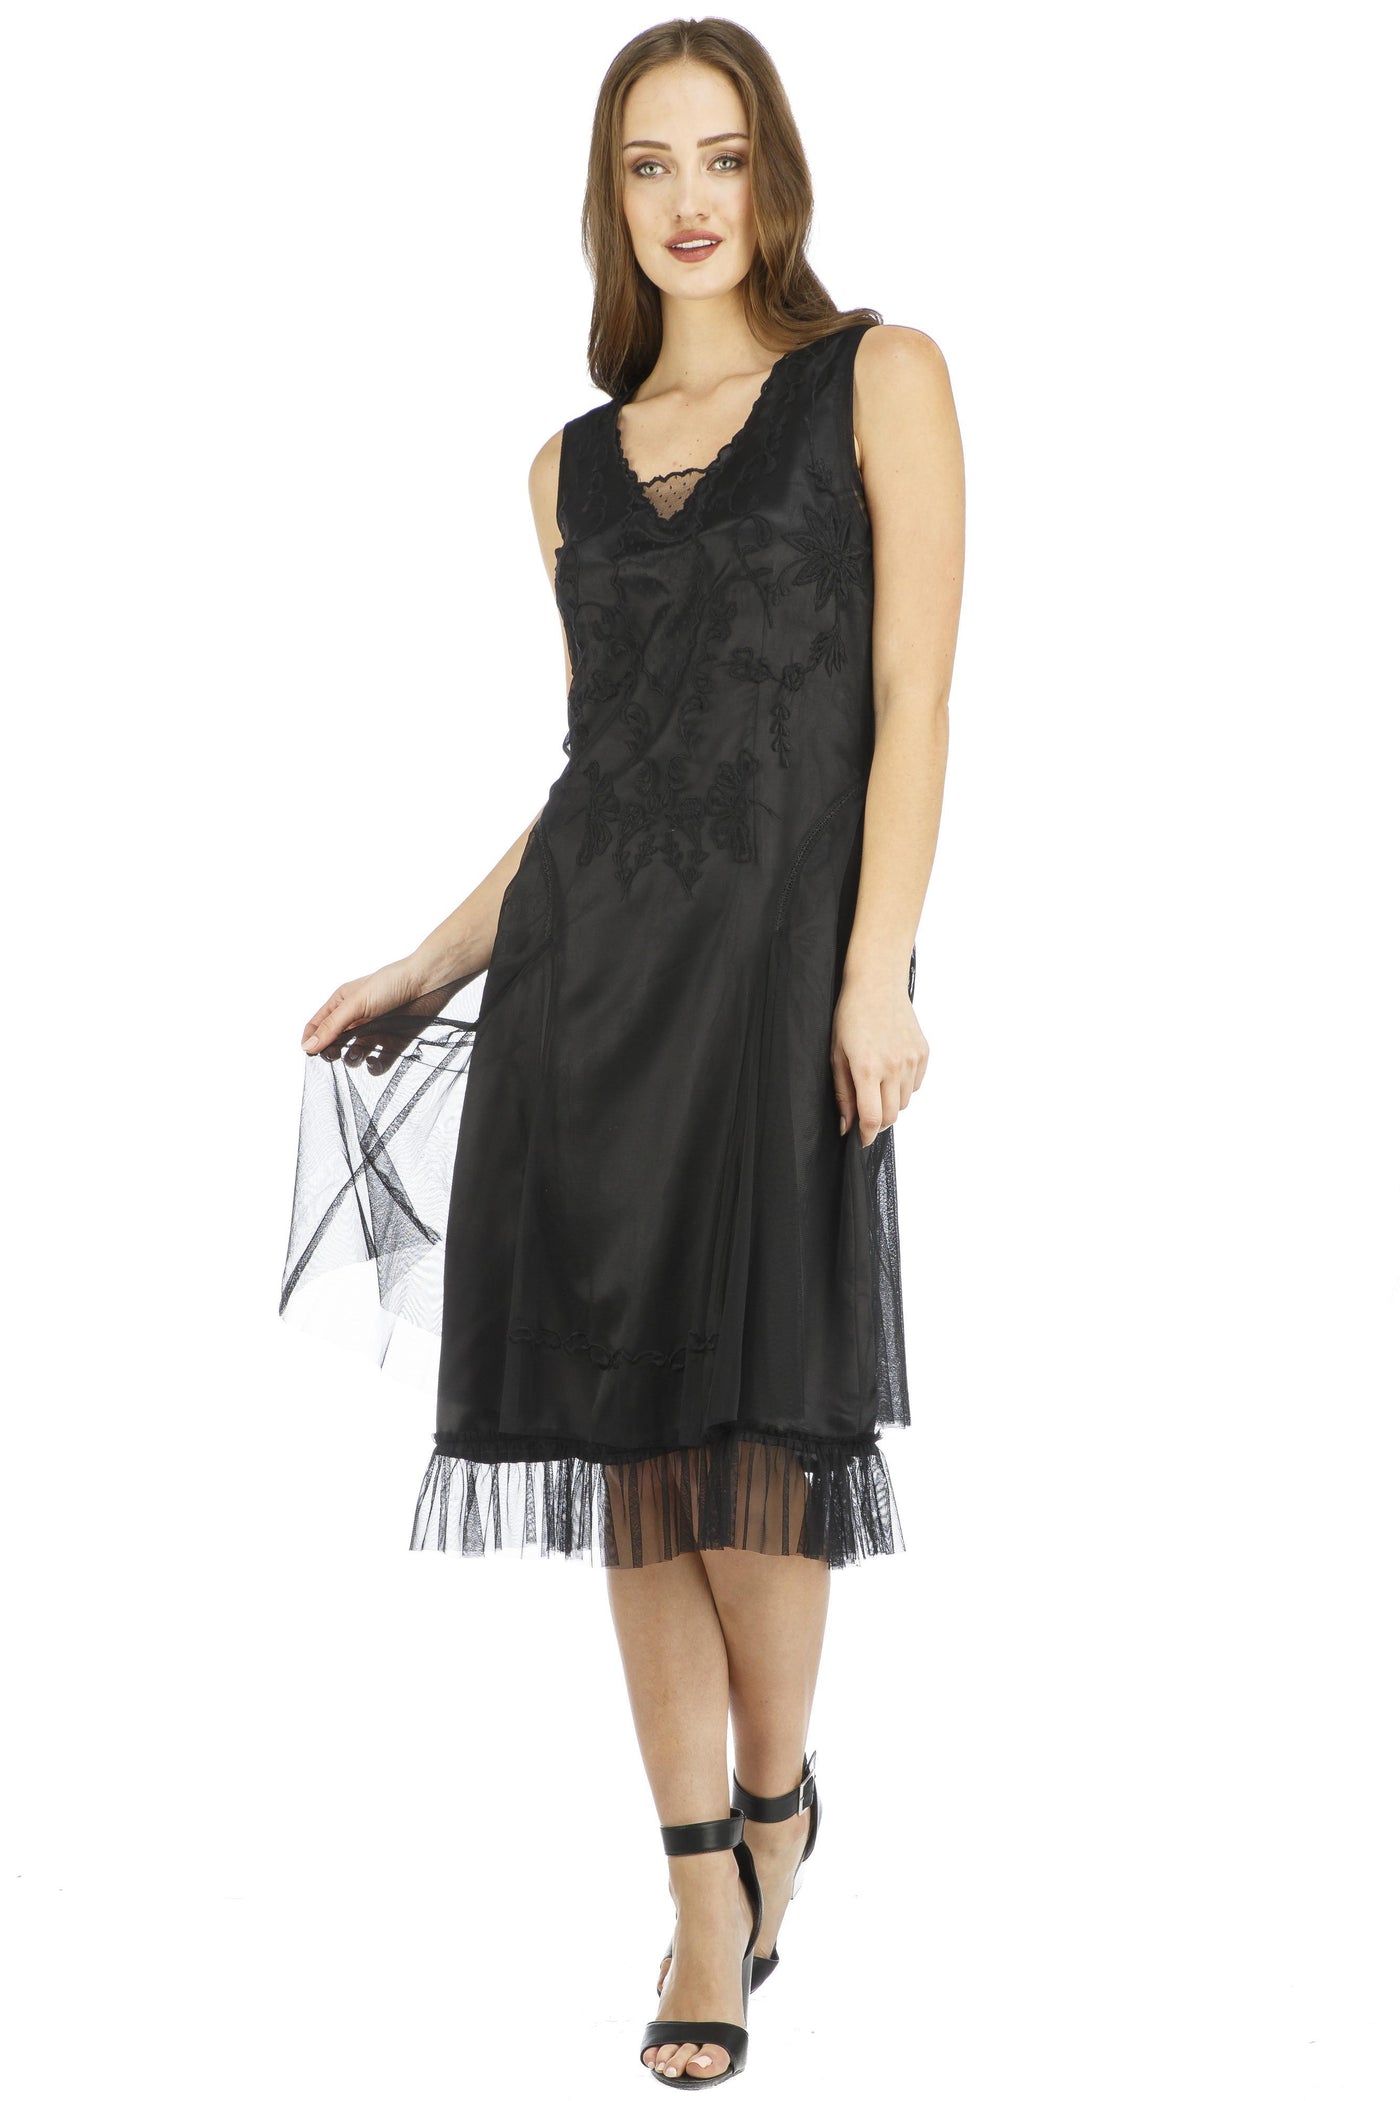 Tara Vintage Style Party Dress in Black by Nataya - SOLD OUT